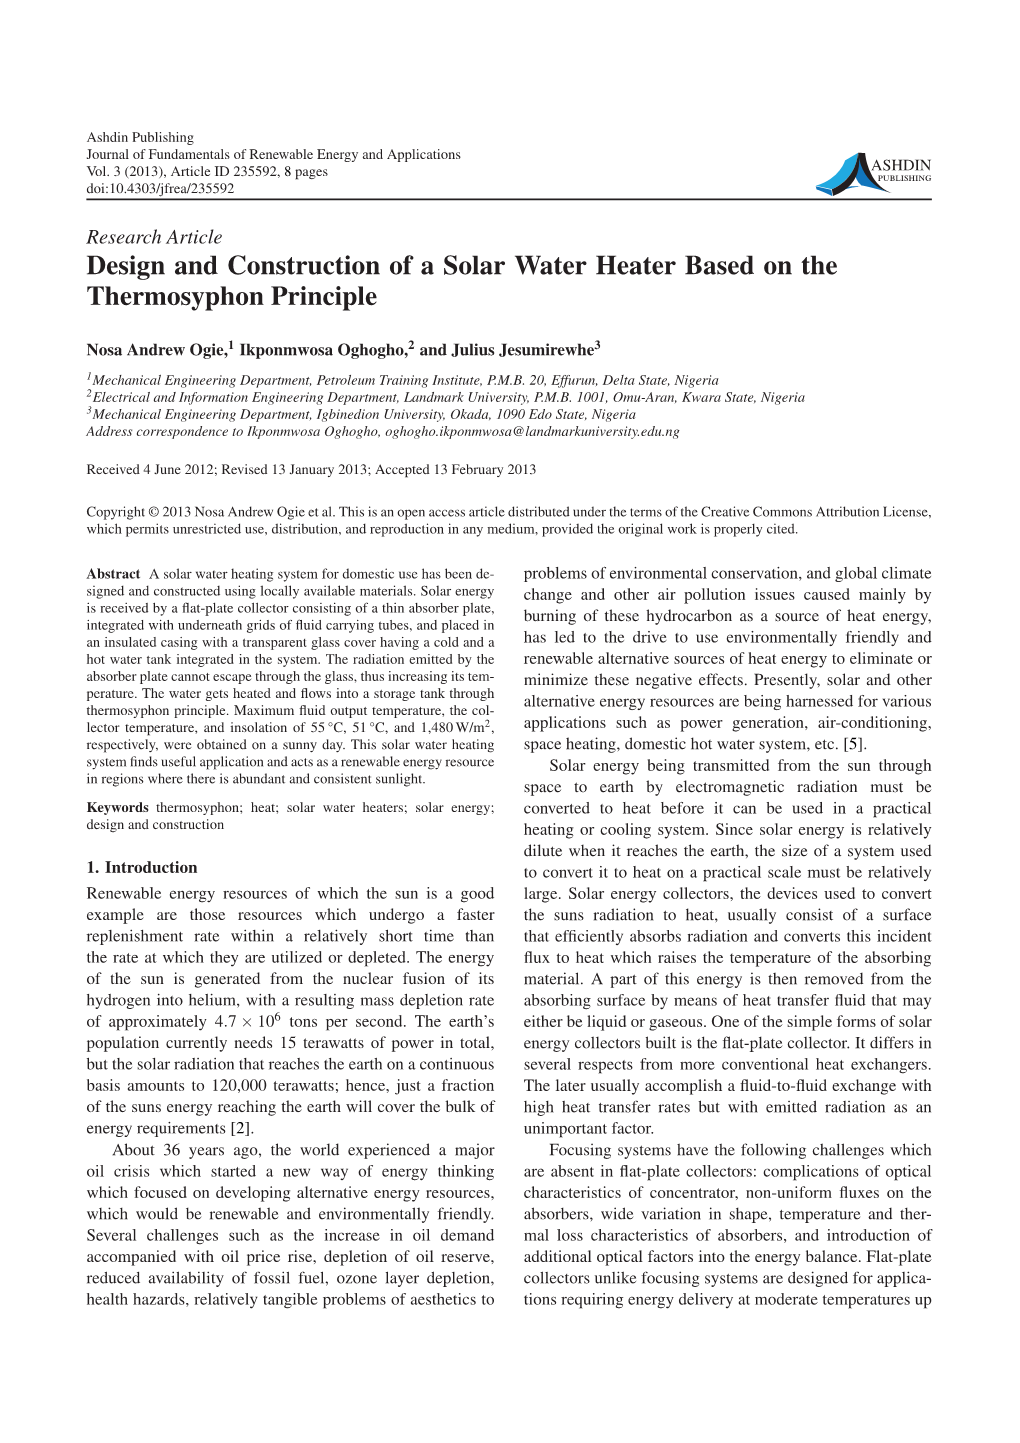 Design and Construction of a Solar Water Heater Based on the Thermosyphon Principle